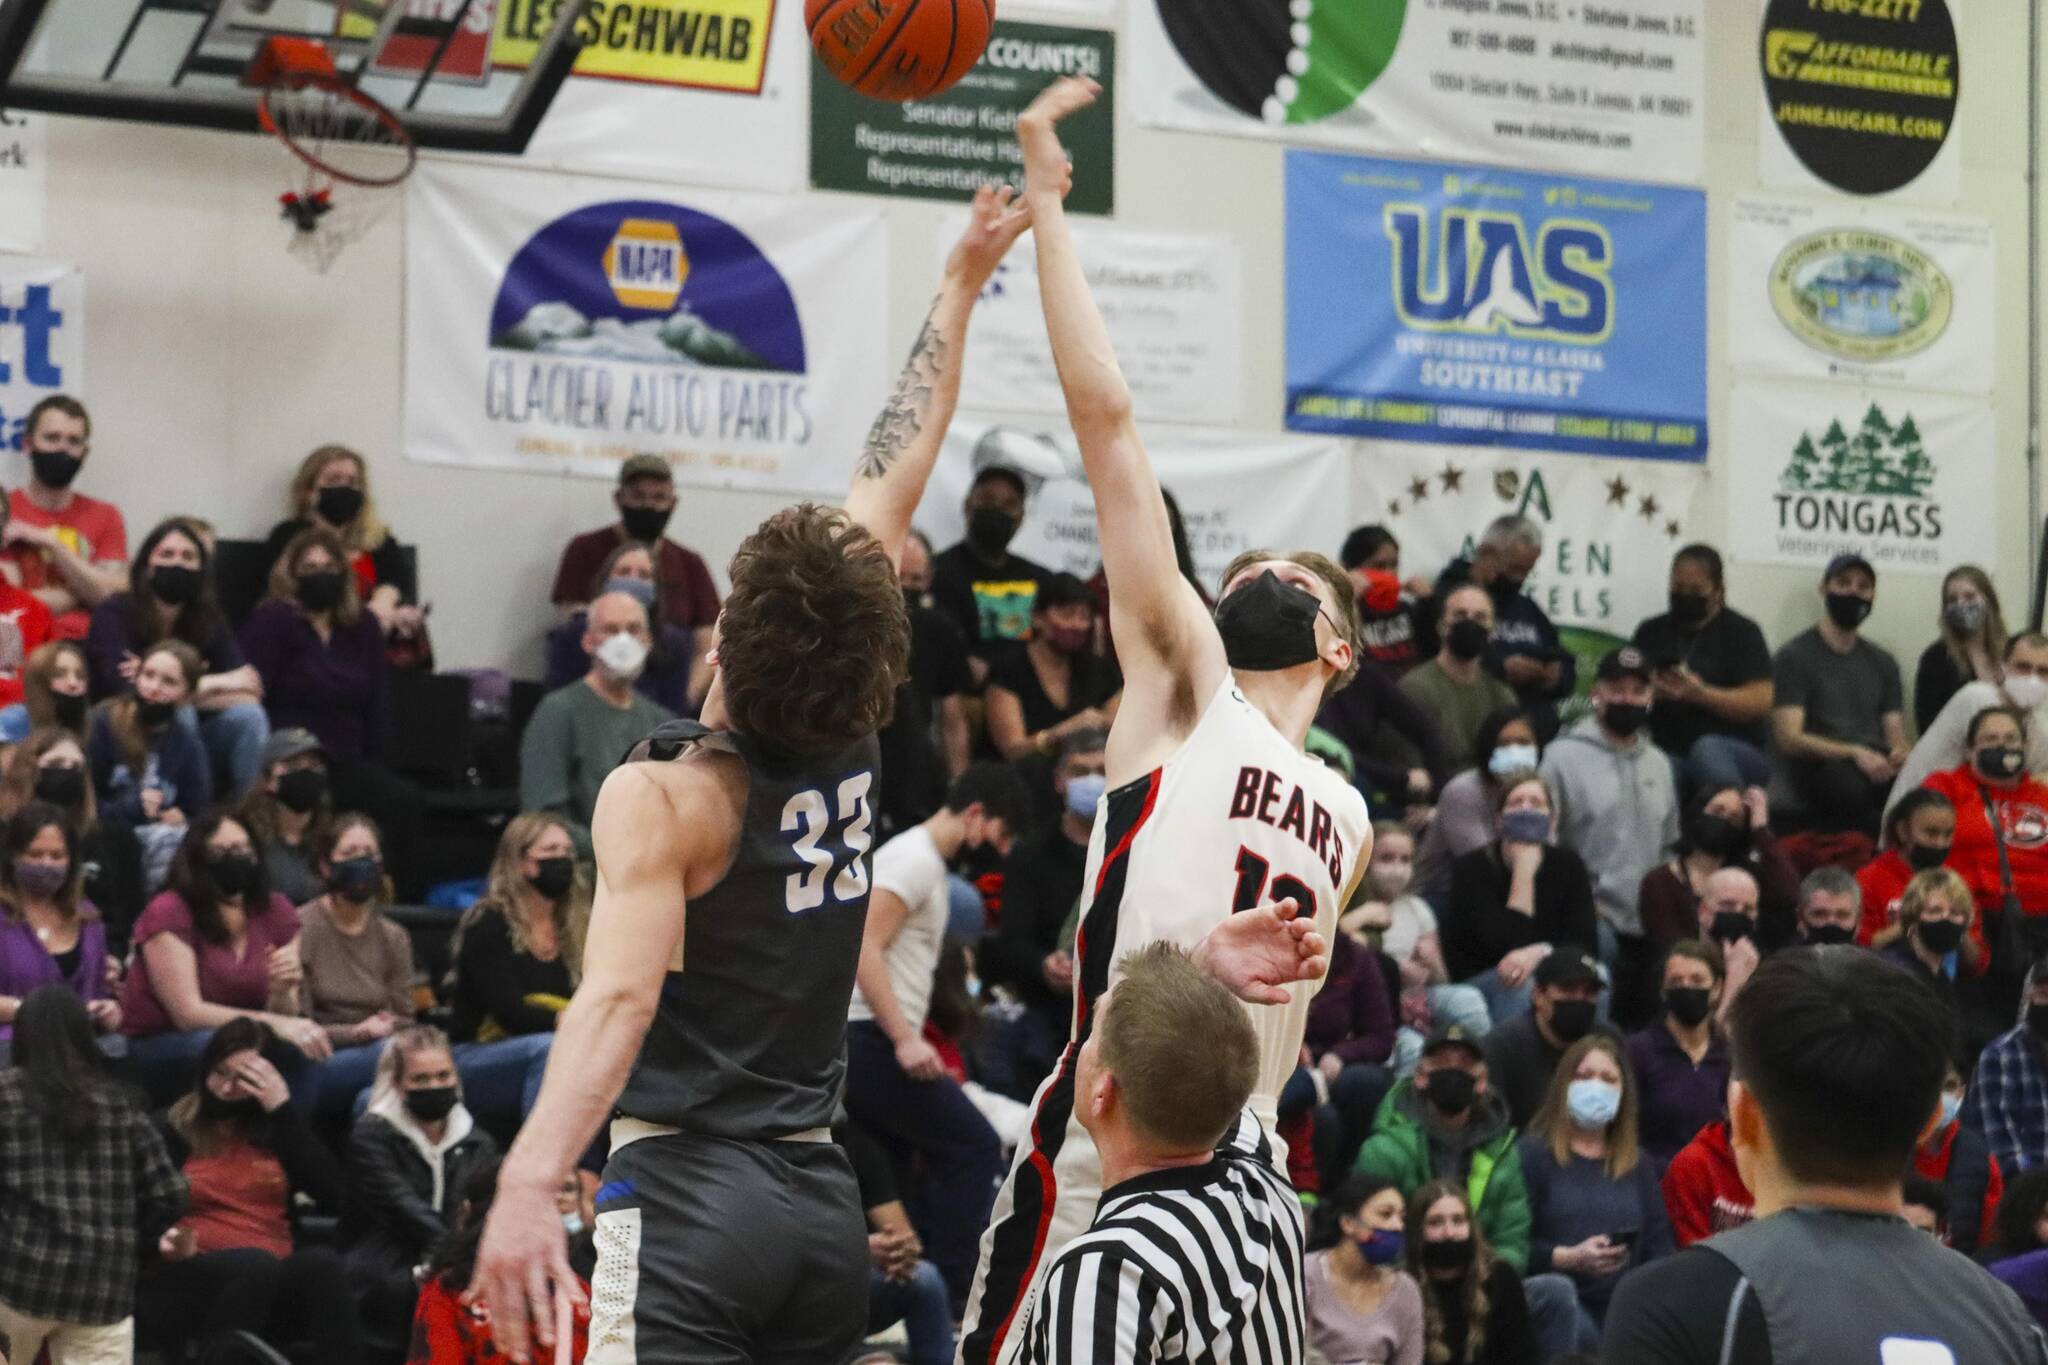 JDHS’ Jake Sleppy, right, vies for the ball in a tipoff against TMHS during the regular basketball season. JDHS just ended their season with an unsuccessful championship attempt. (Michael S. Lockett / Juneau Empire File)